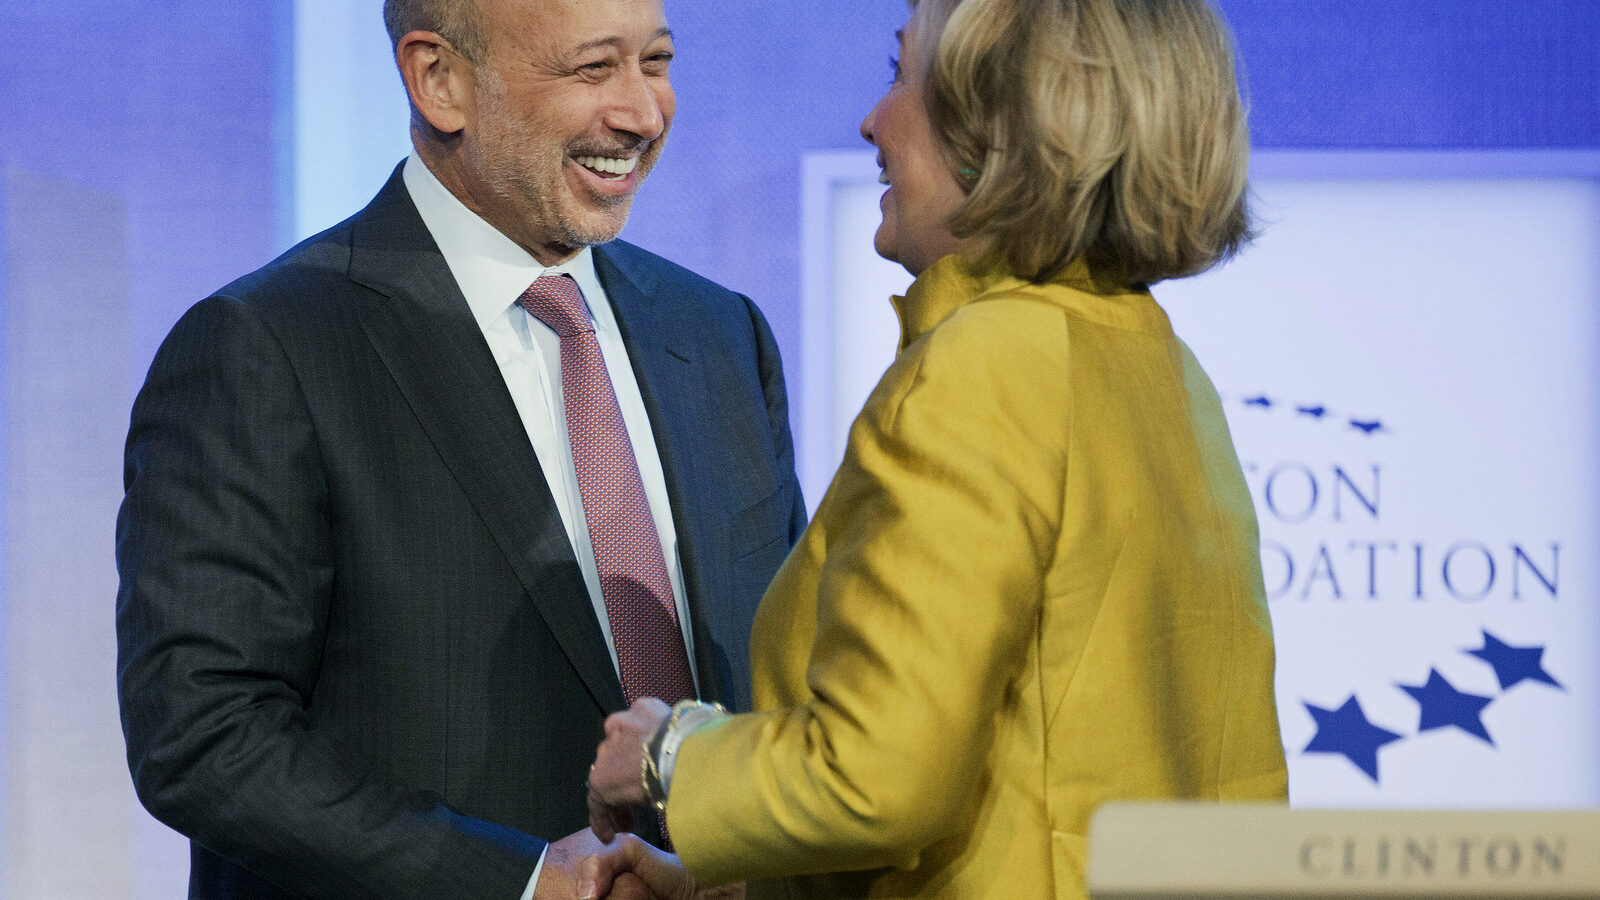 Lloyd Blankfein, CEO of Goldman Sachs, is greeted by Hillary Clinton at a panel discussion at the Clinton Global Initiative, Sept. 24, 2014 in New York.